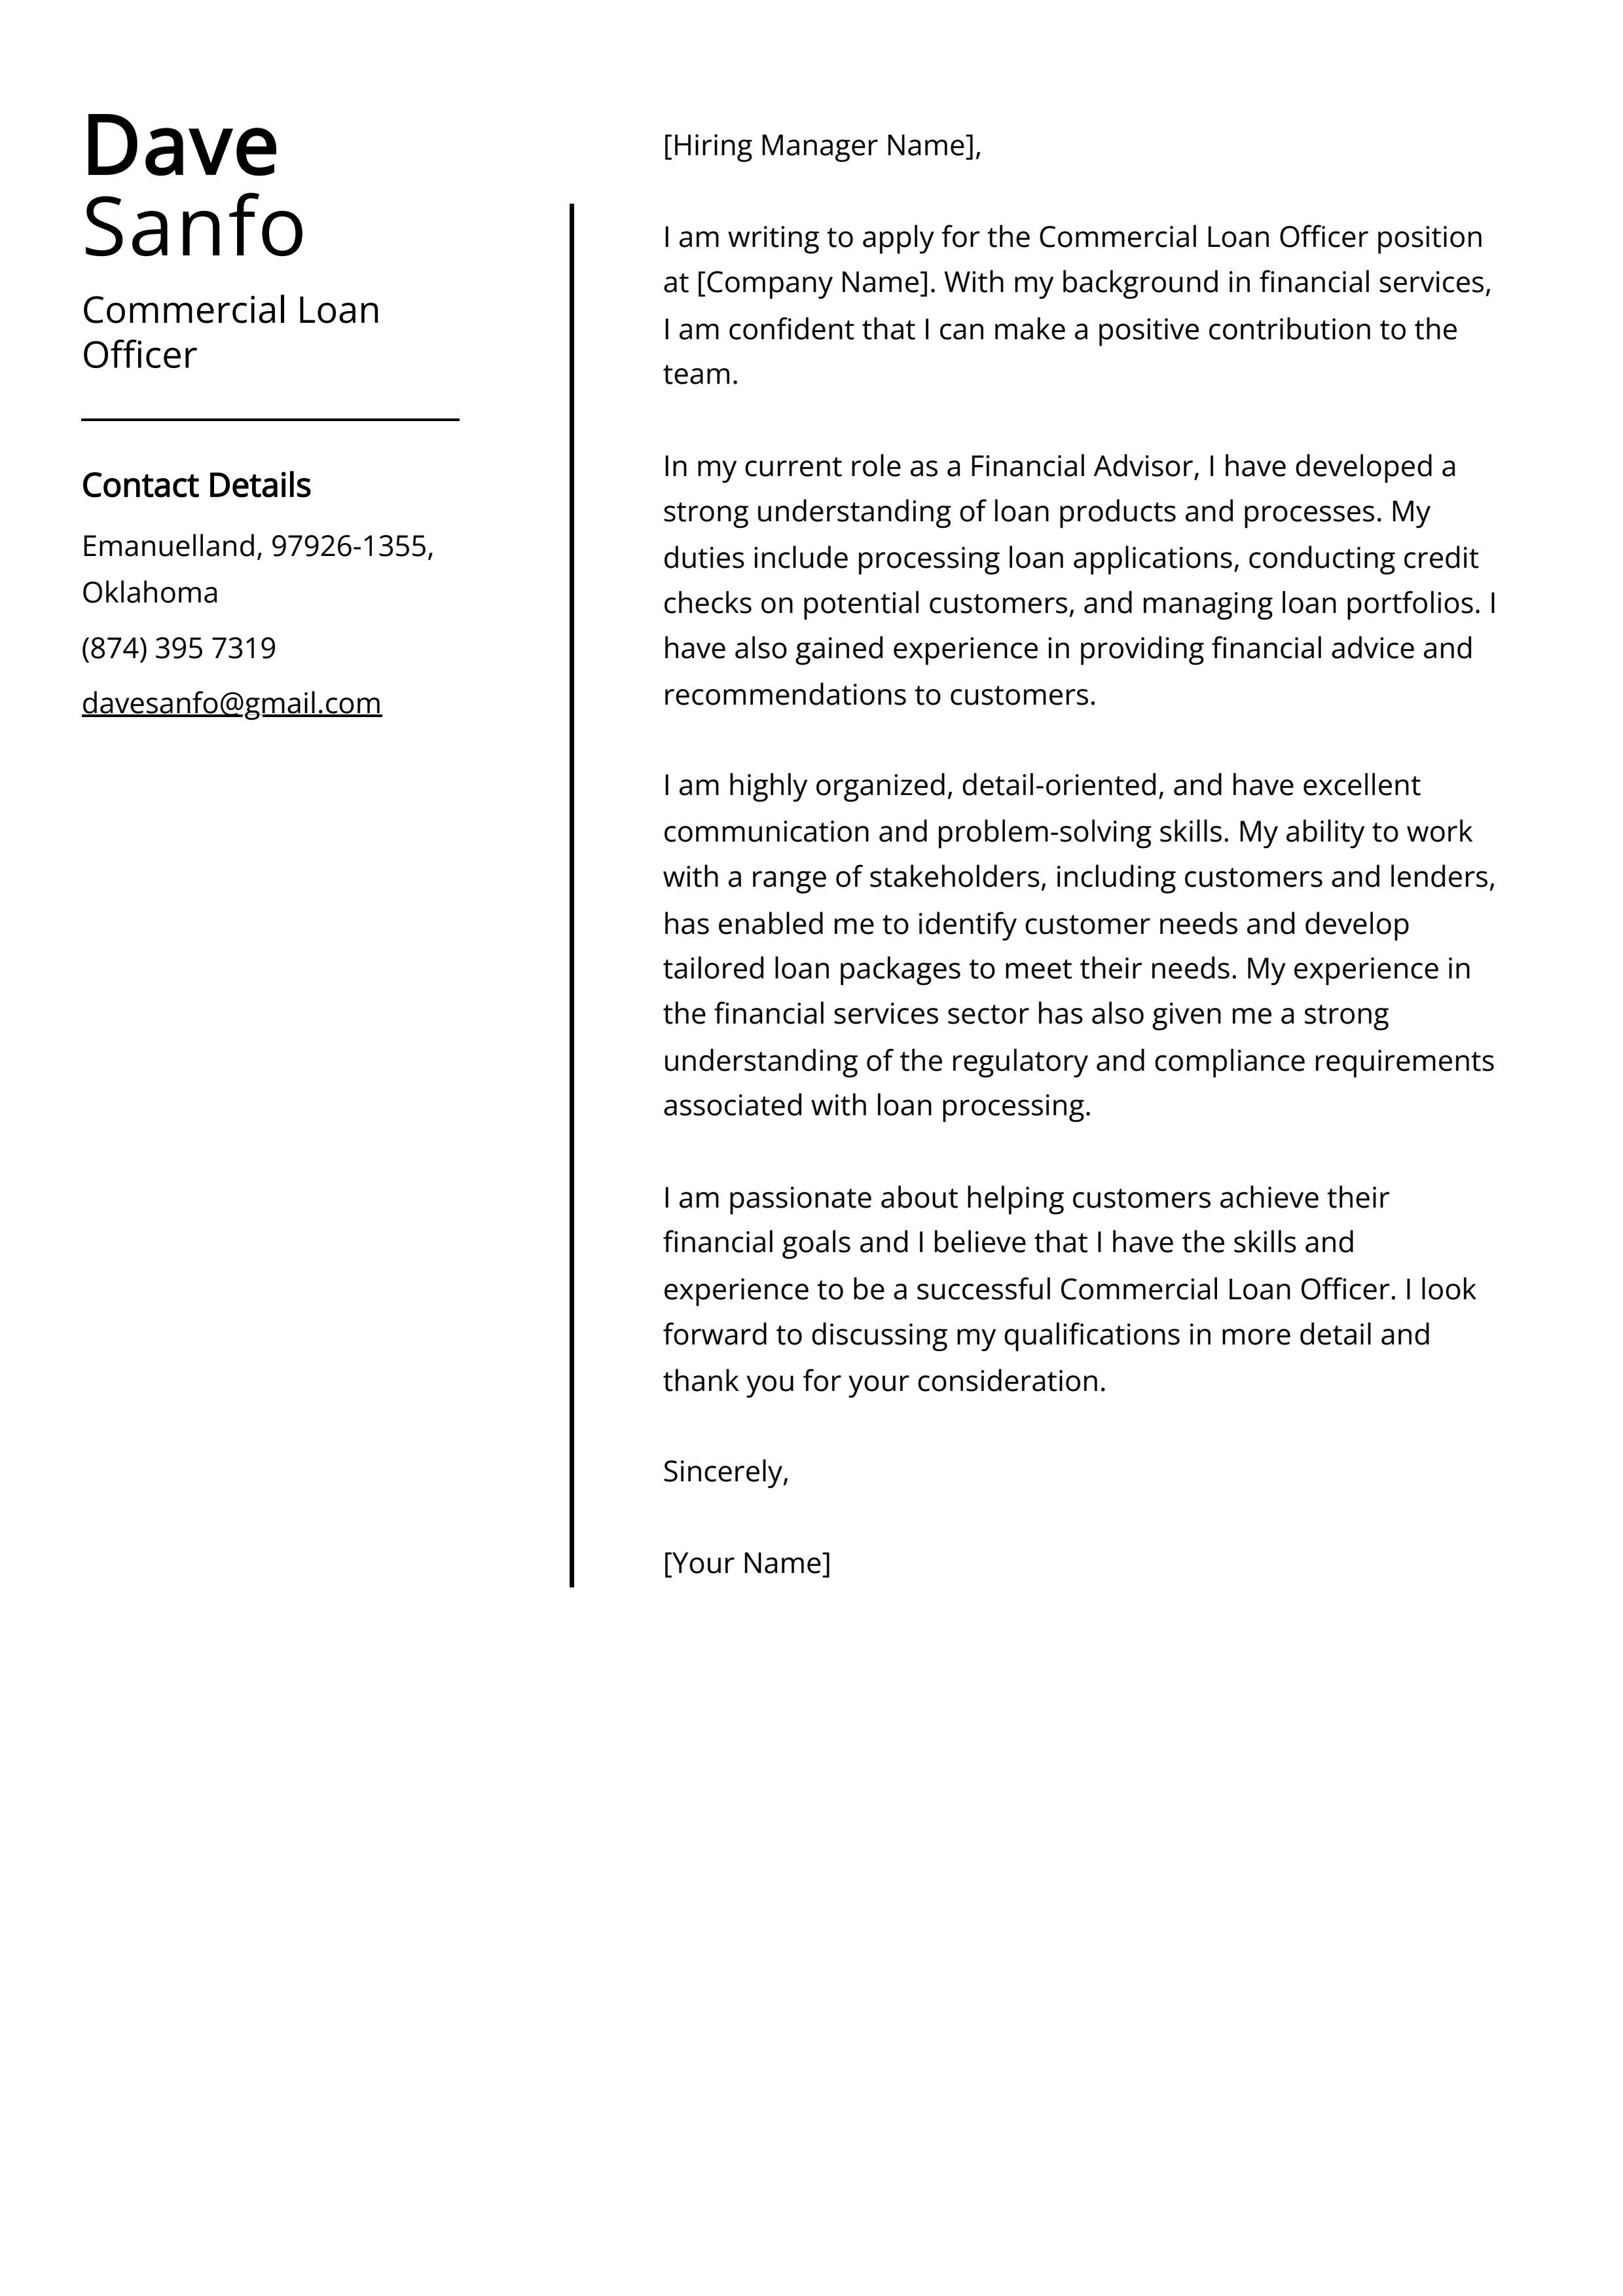 Commercial Loan Officer Cover Letter Example